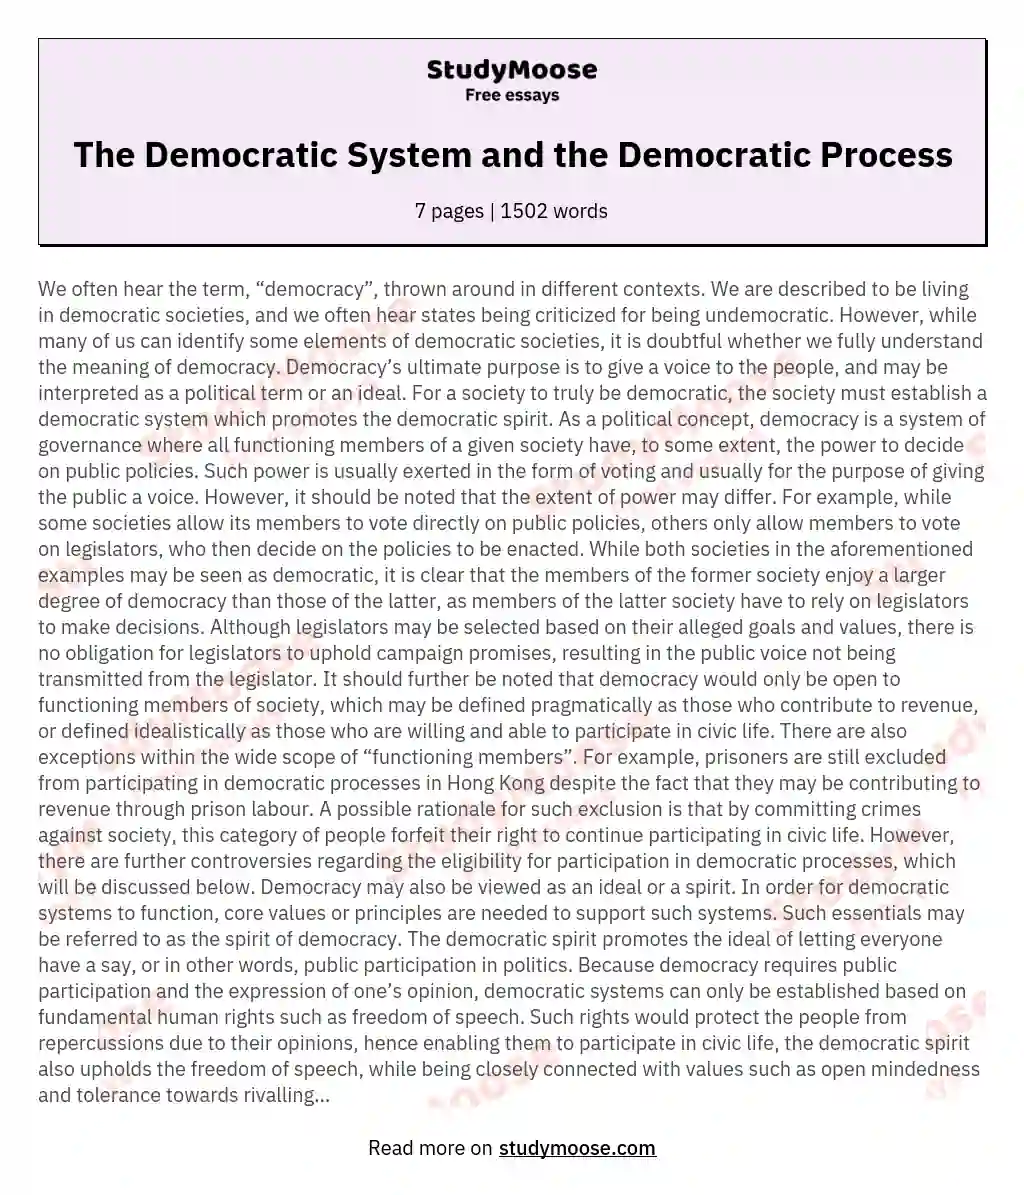 The Democratic System and the Democratic Process essay